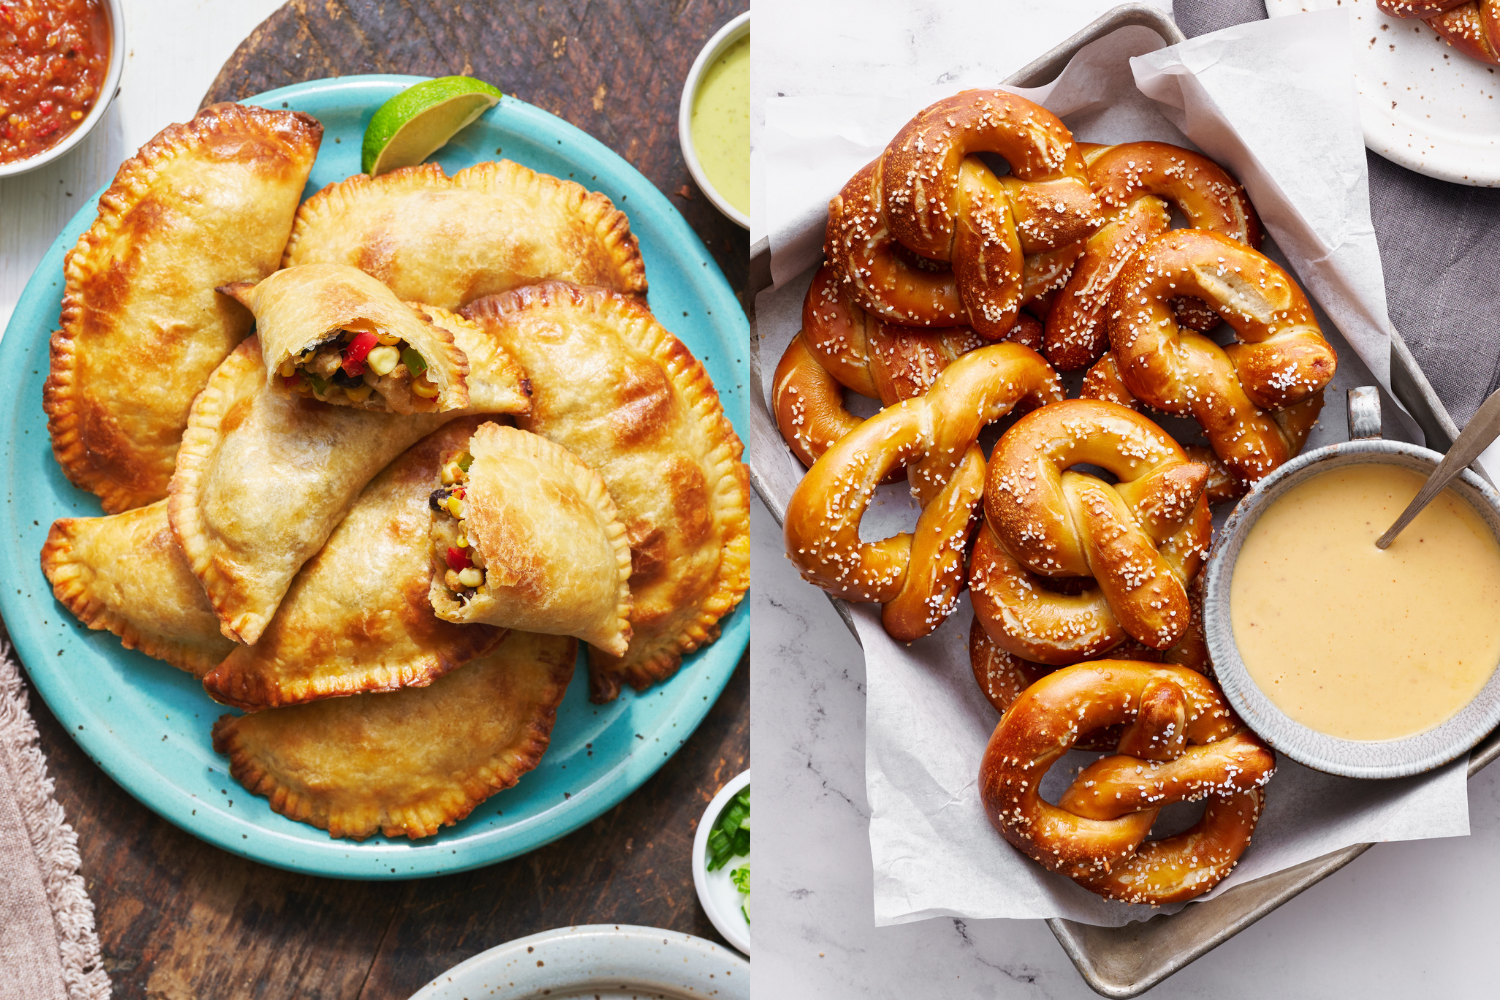 savory super bowl snack ideas: a pile of empanadas on a colorful plate, and a bunch of soft pretzels on a platter with a bowl of beer cheese dip next to it.